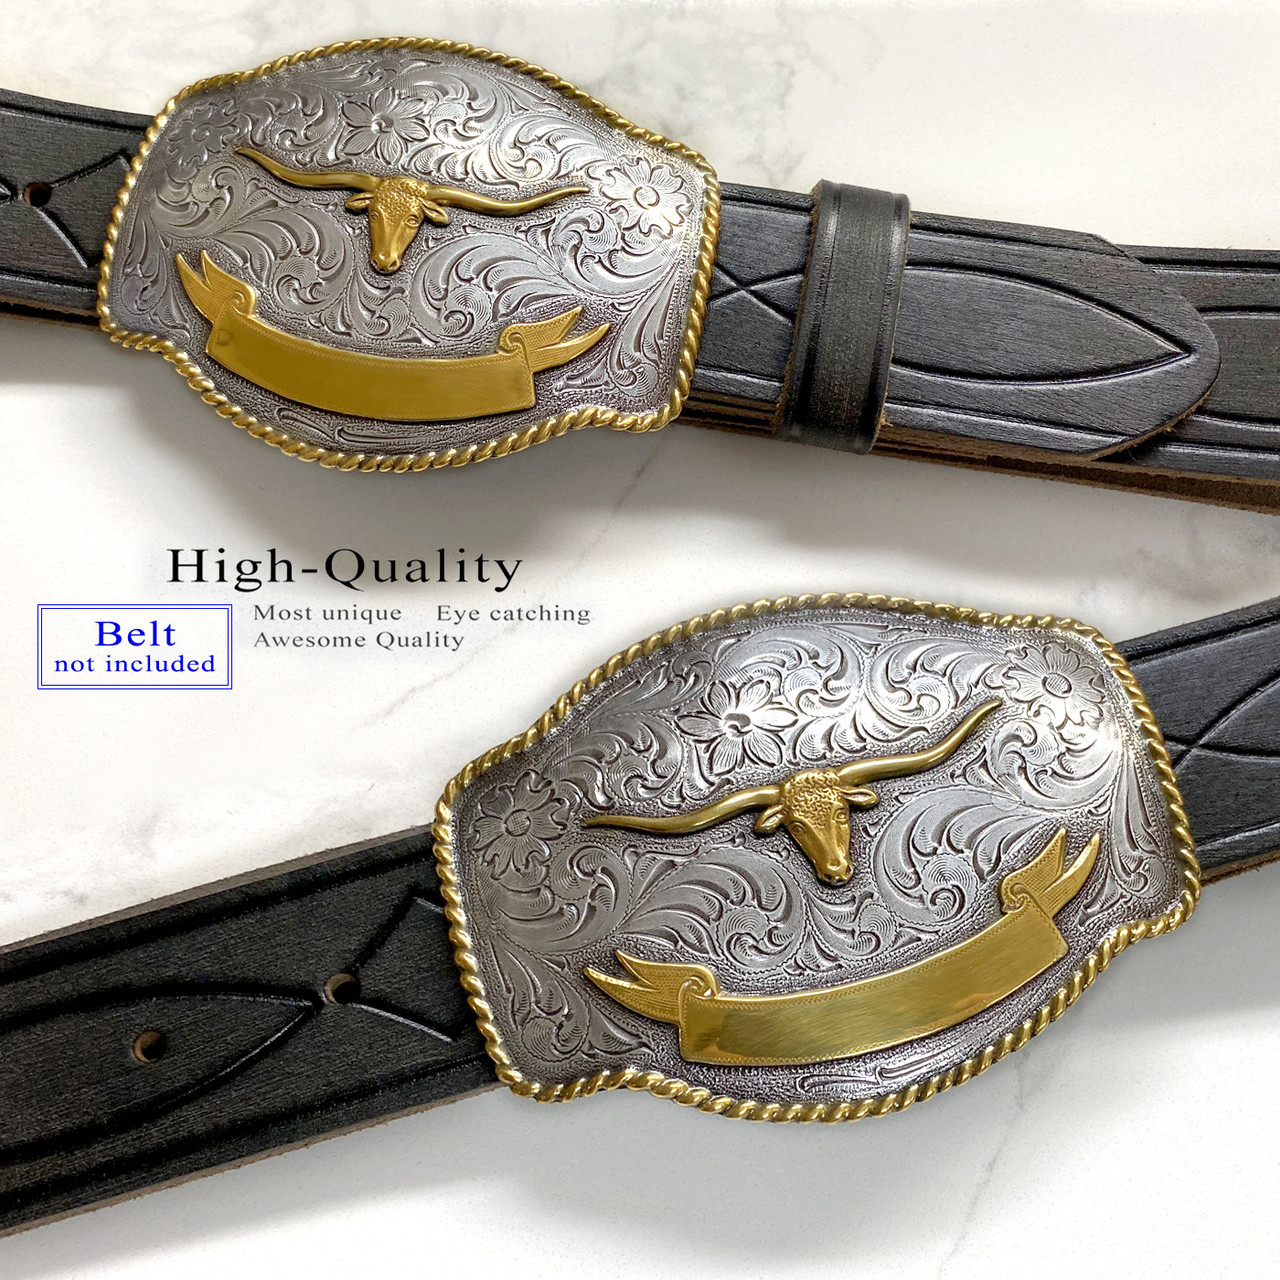 Gold Belt Buckle and Gold Strap End, Langobardic